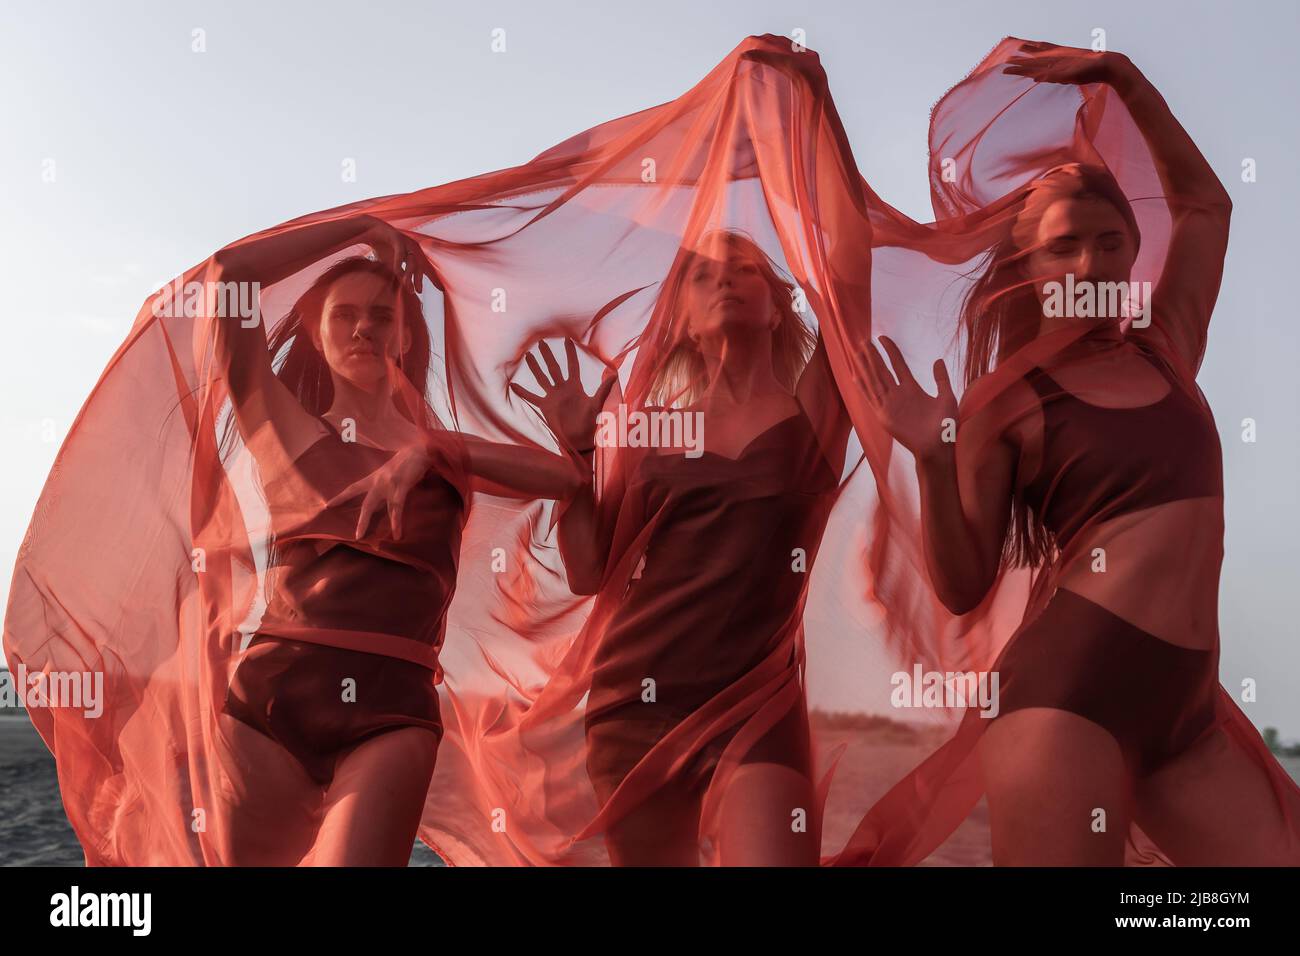 Three girls in red flowing fabric romantic pose and dance on sand dune Stock Photo